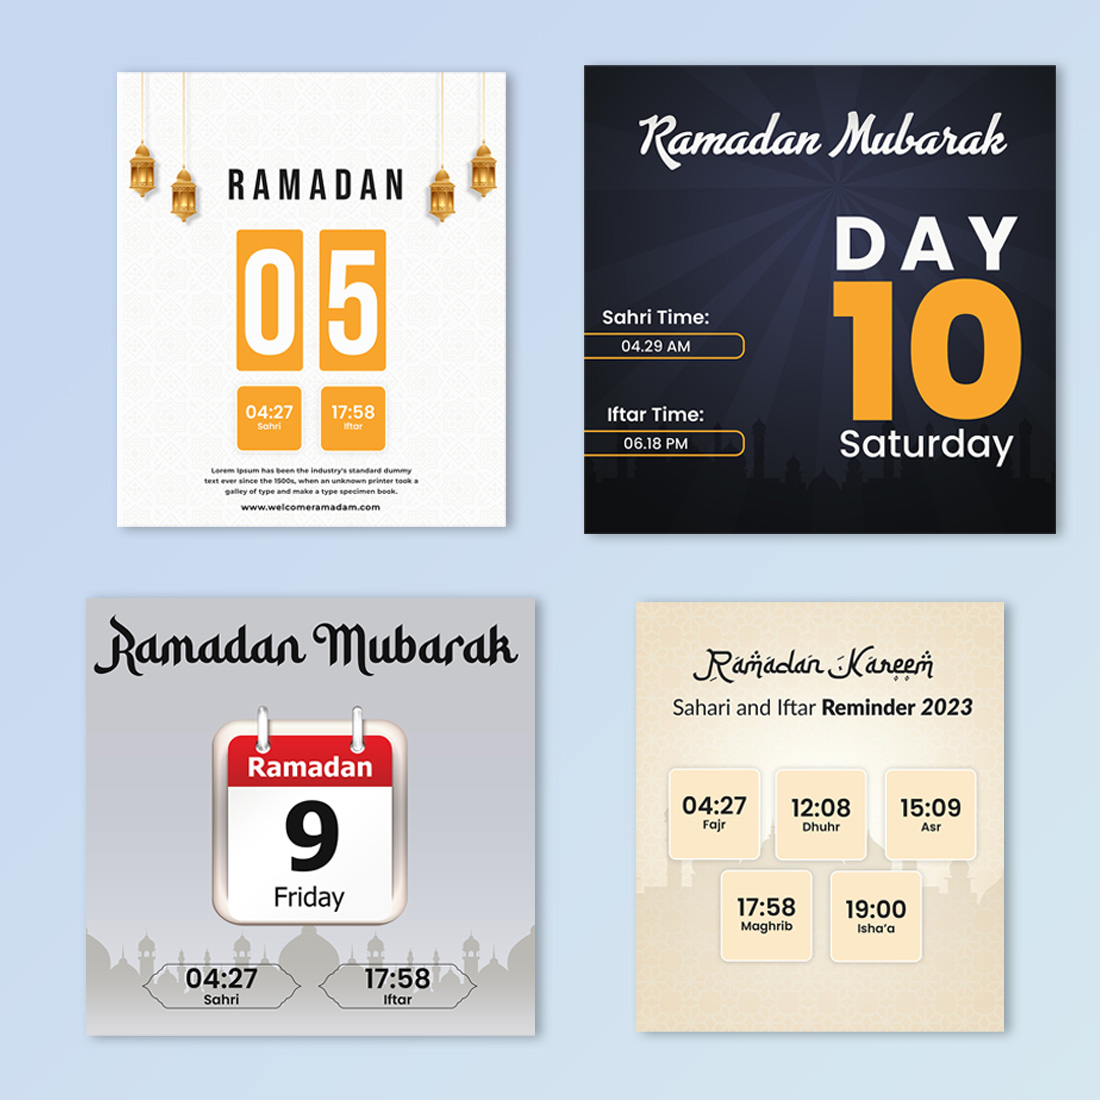 Ramadan sahri and iftar schedule post template PSD set for social media post preview image.